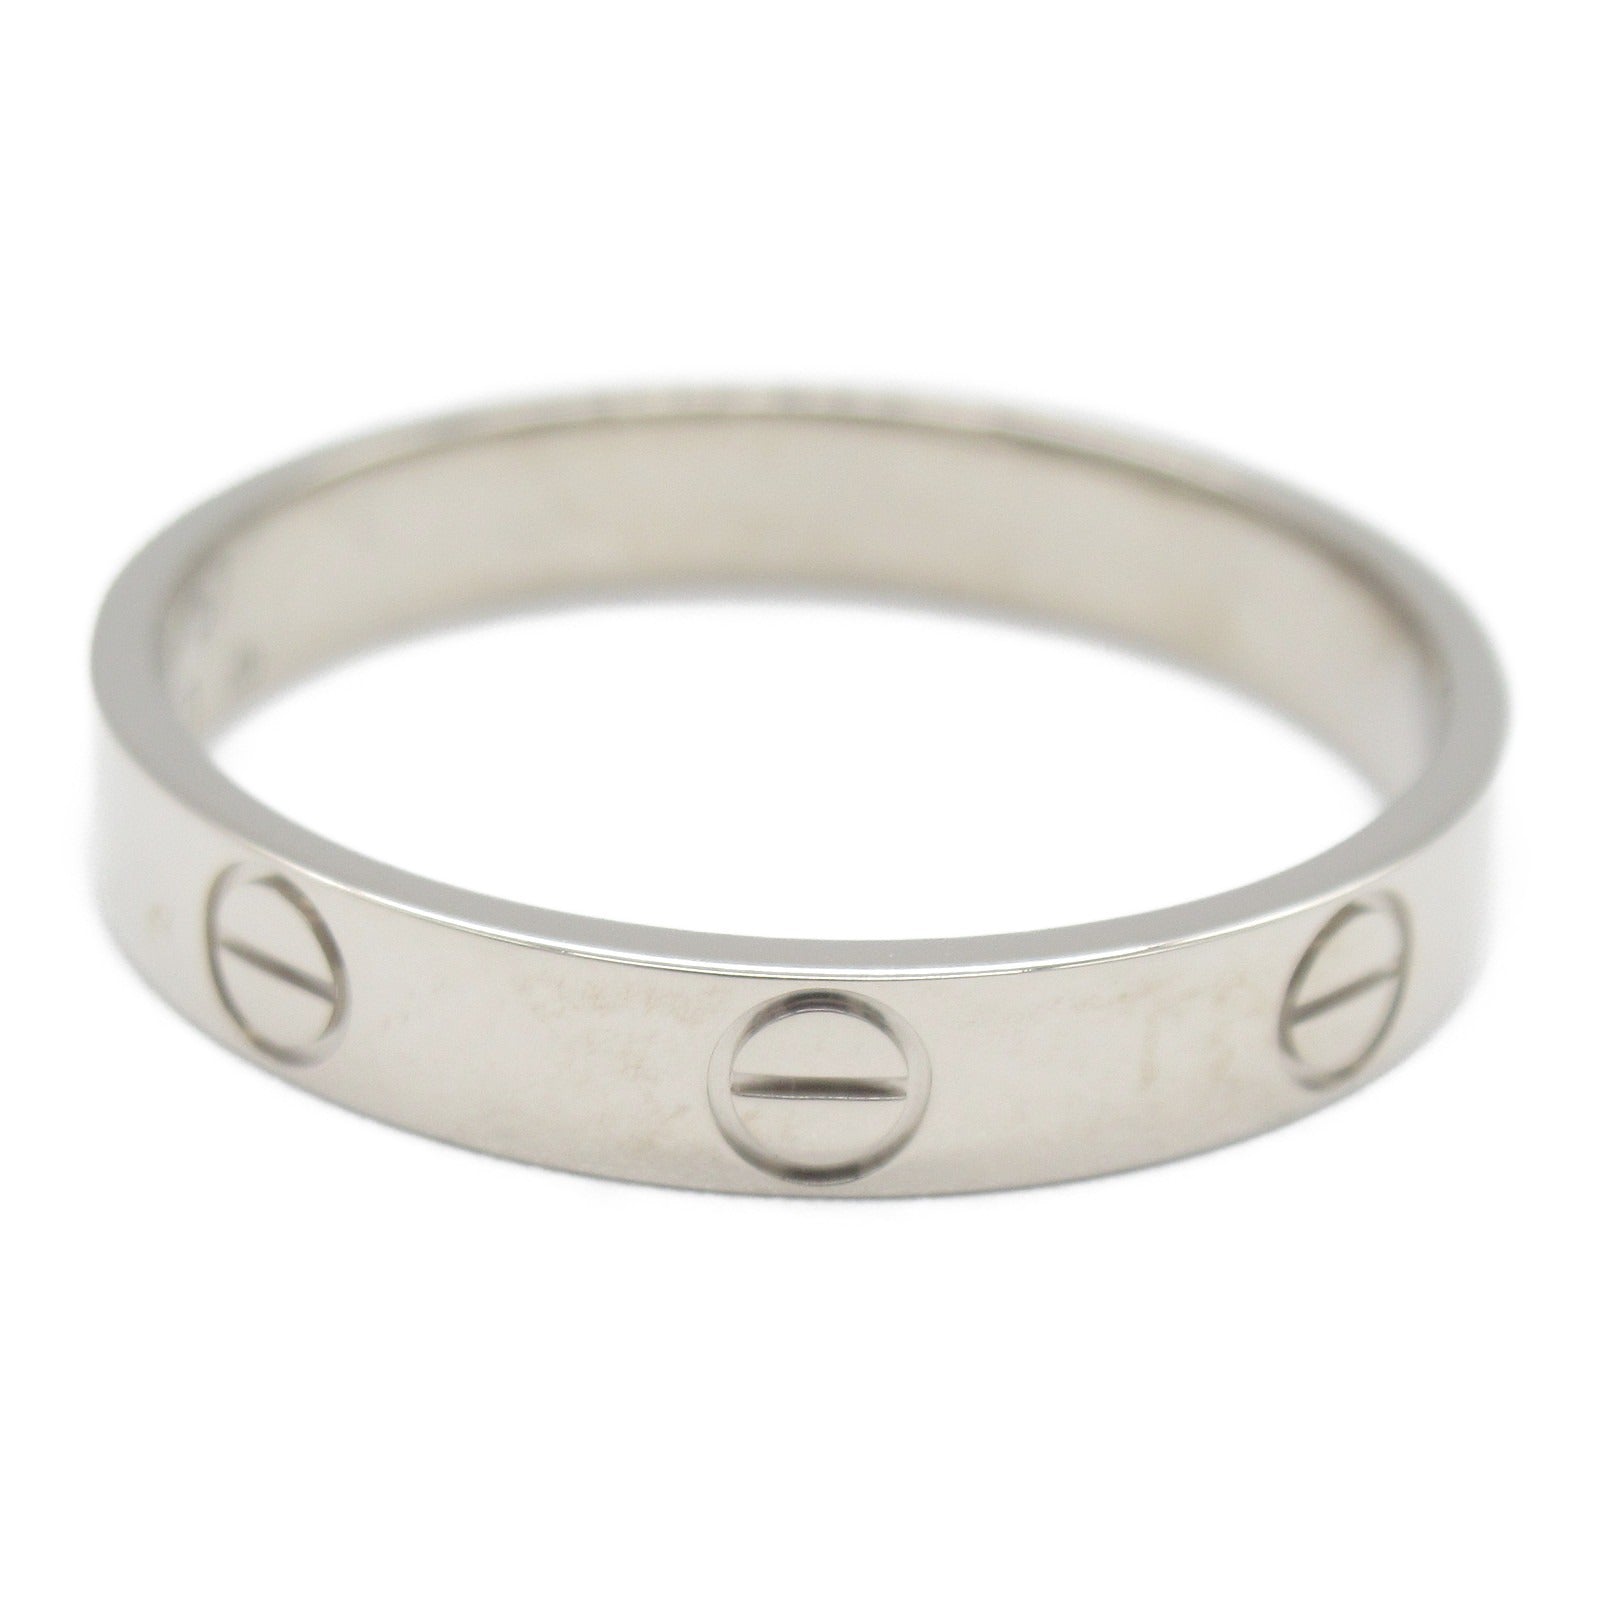 Cartier Cartier Mini-Love Ring Ring Jewelry K18WG (White G)   Silver B4085100